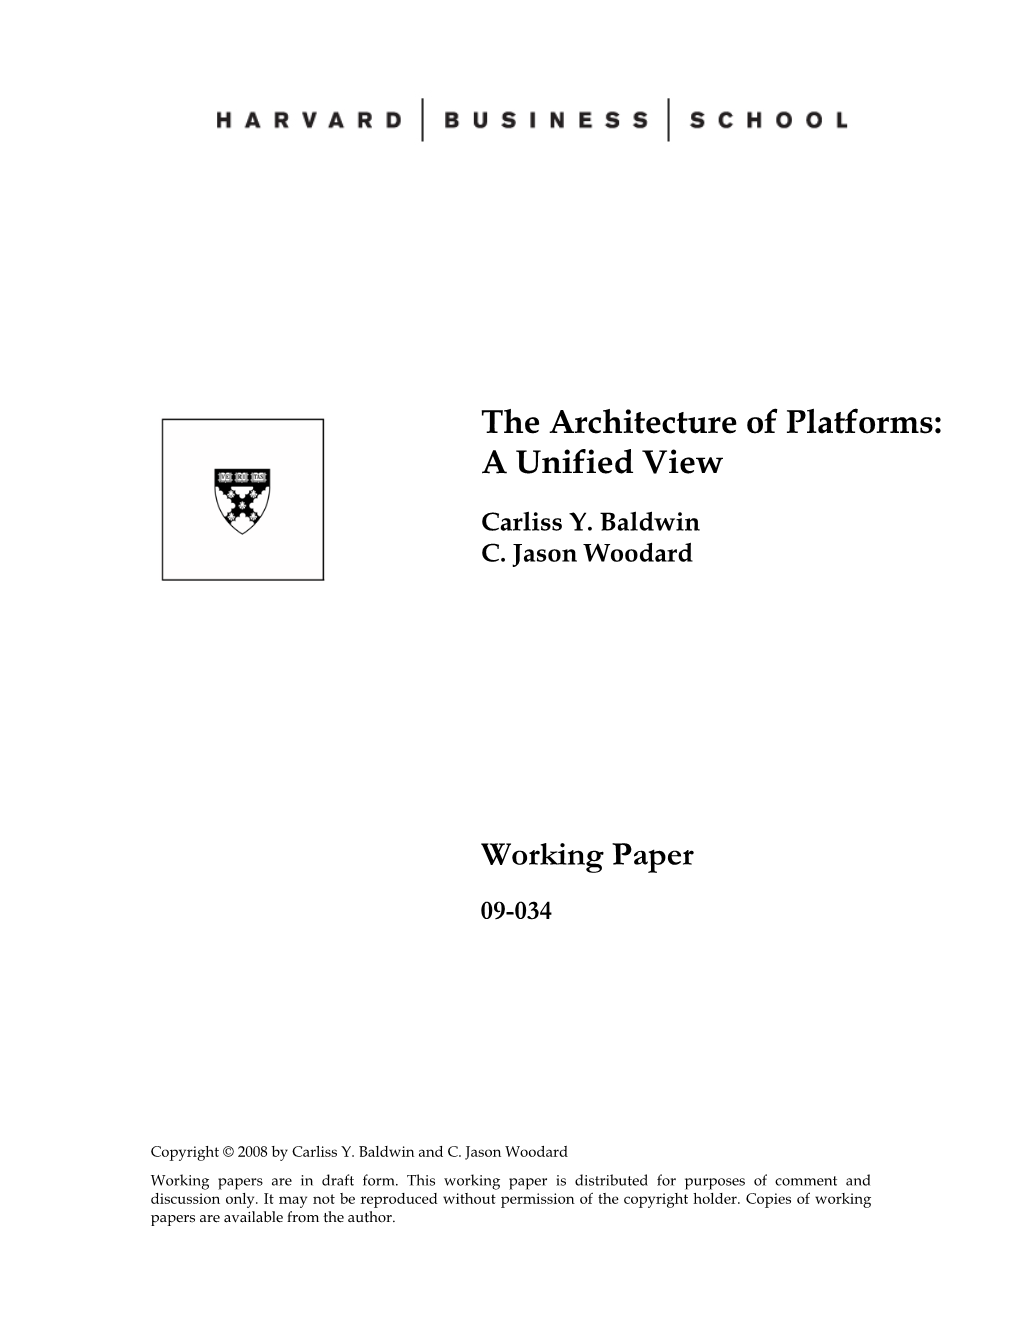 The Architecture of Platforms: a Unified View Working Paper